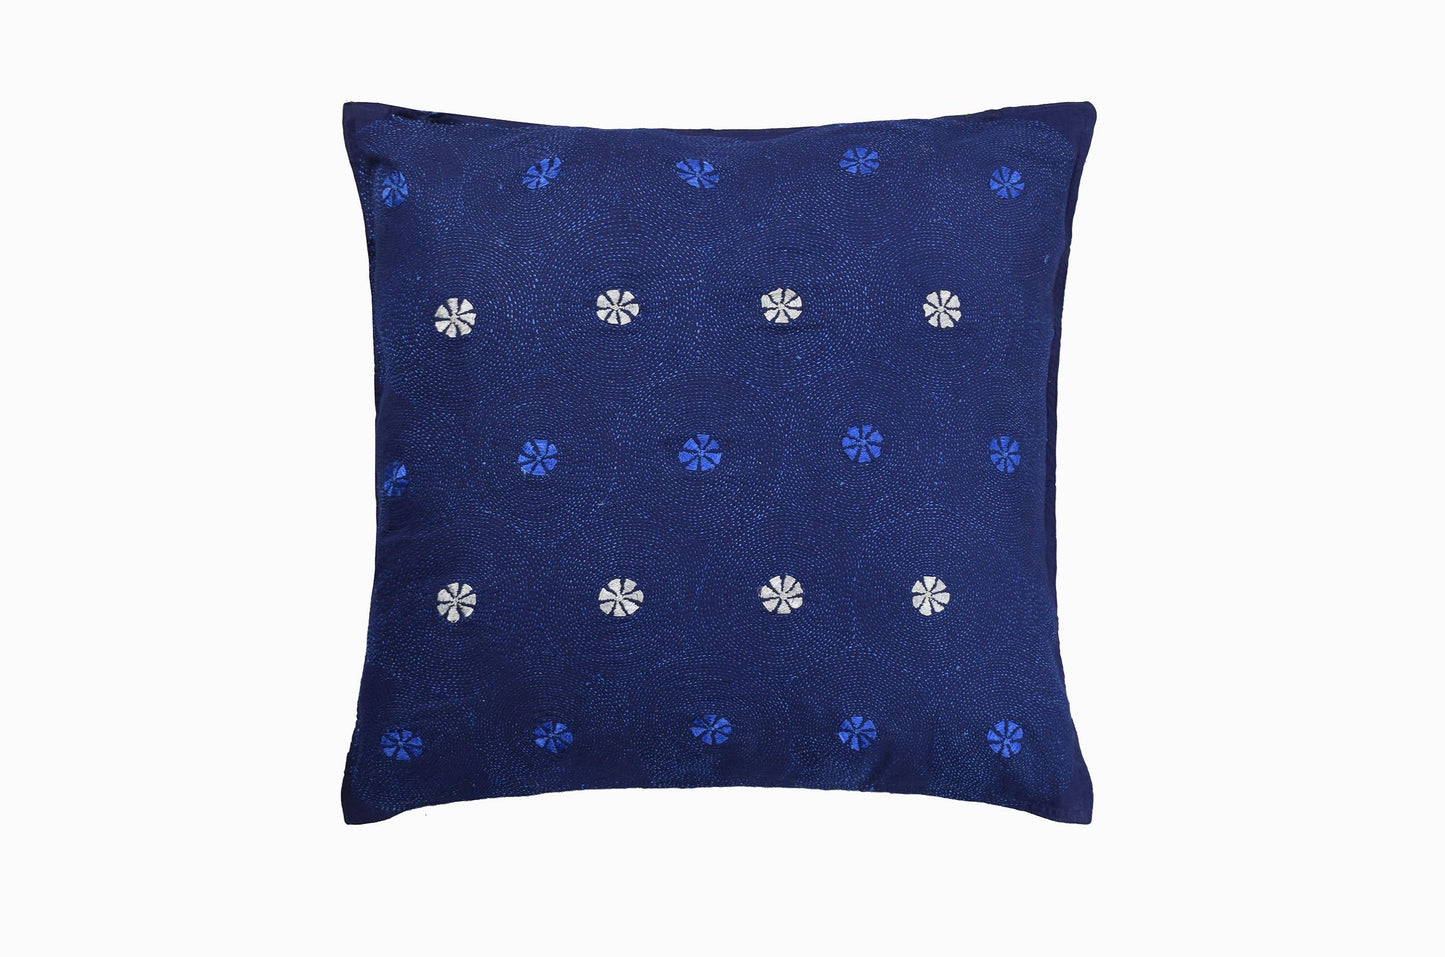 Embroidered cushion Ref BDC101